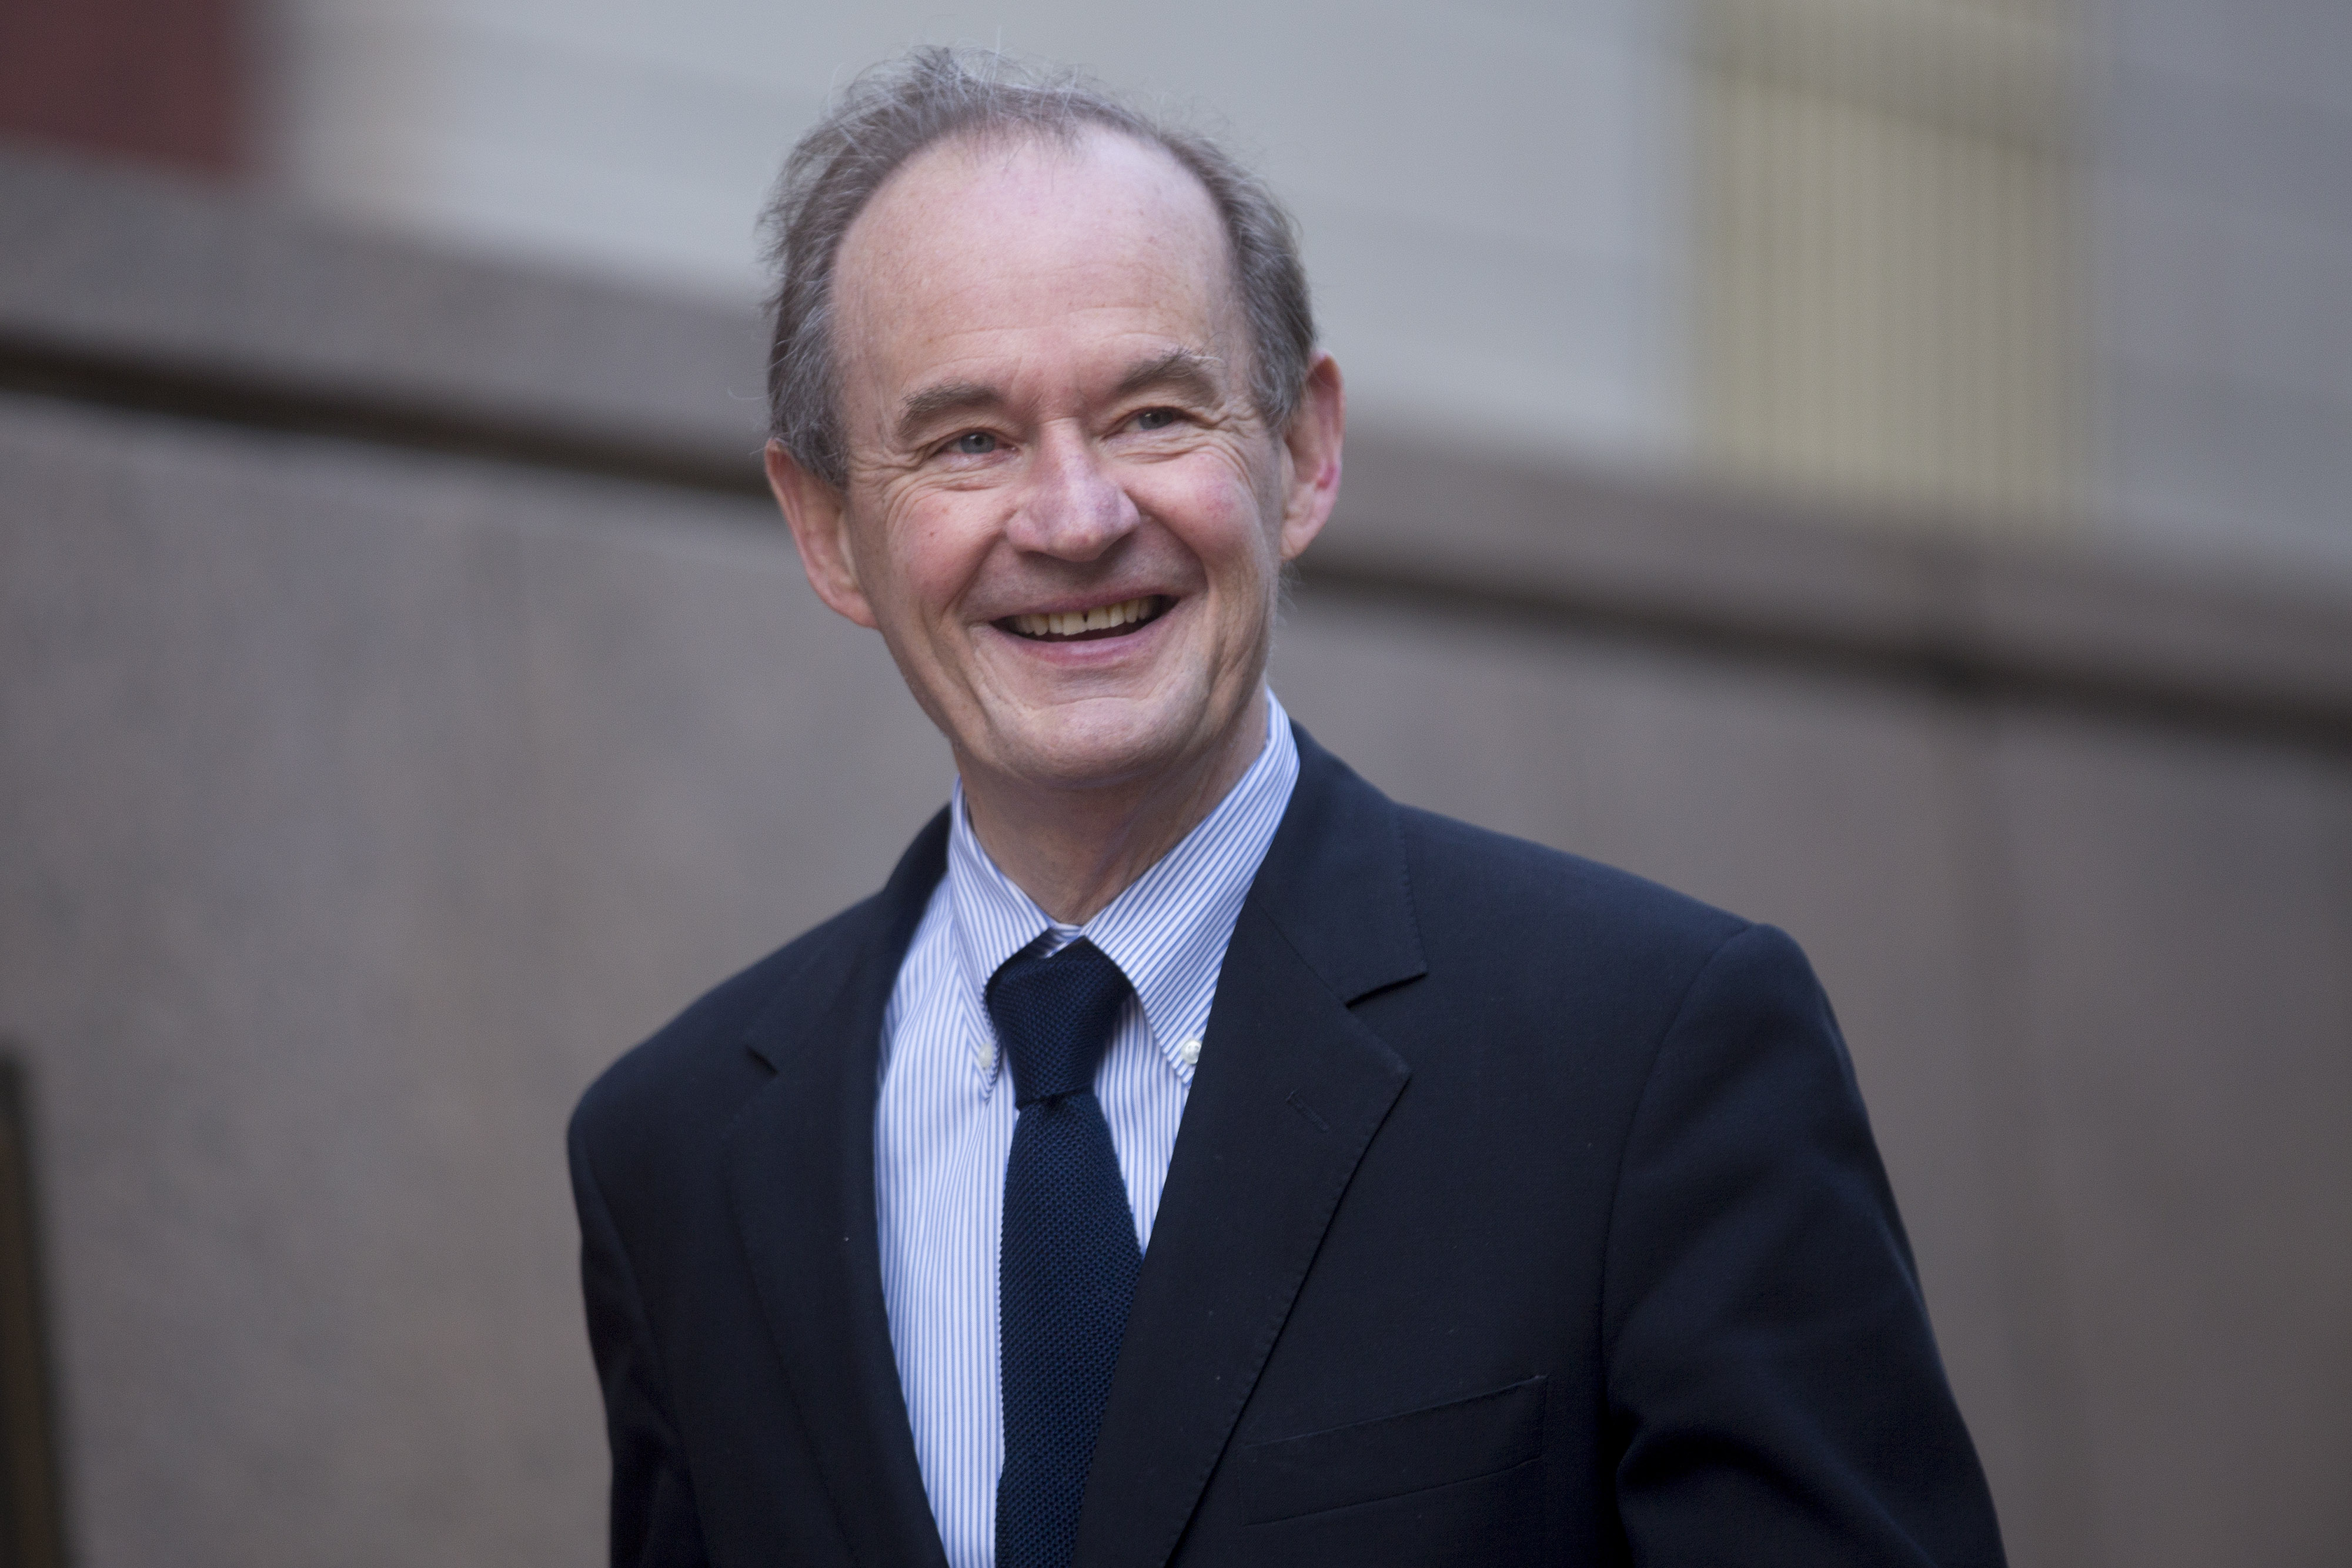 David Boies arrives to the U.S. Court of Federal Claims in Washington, DC on Oct. 7, 2014. (Andrew Harrer—Bloomberg/Getty Images)